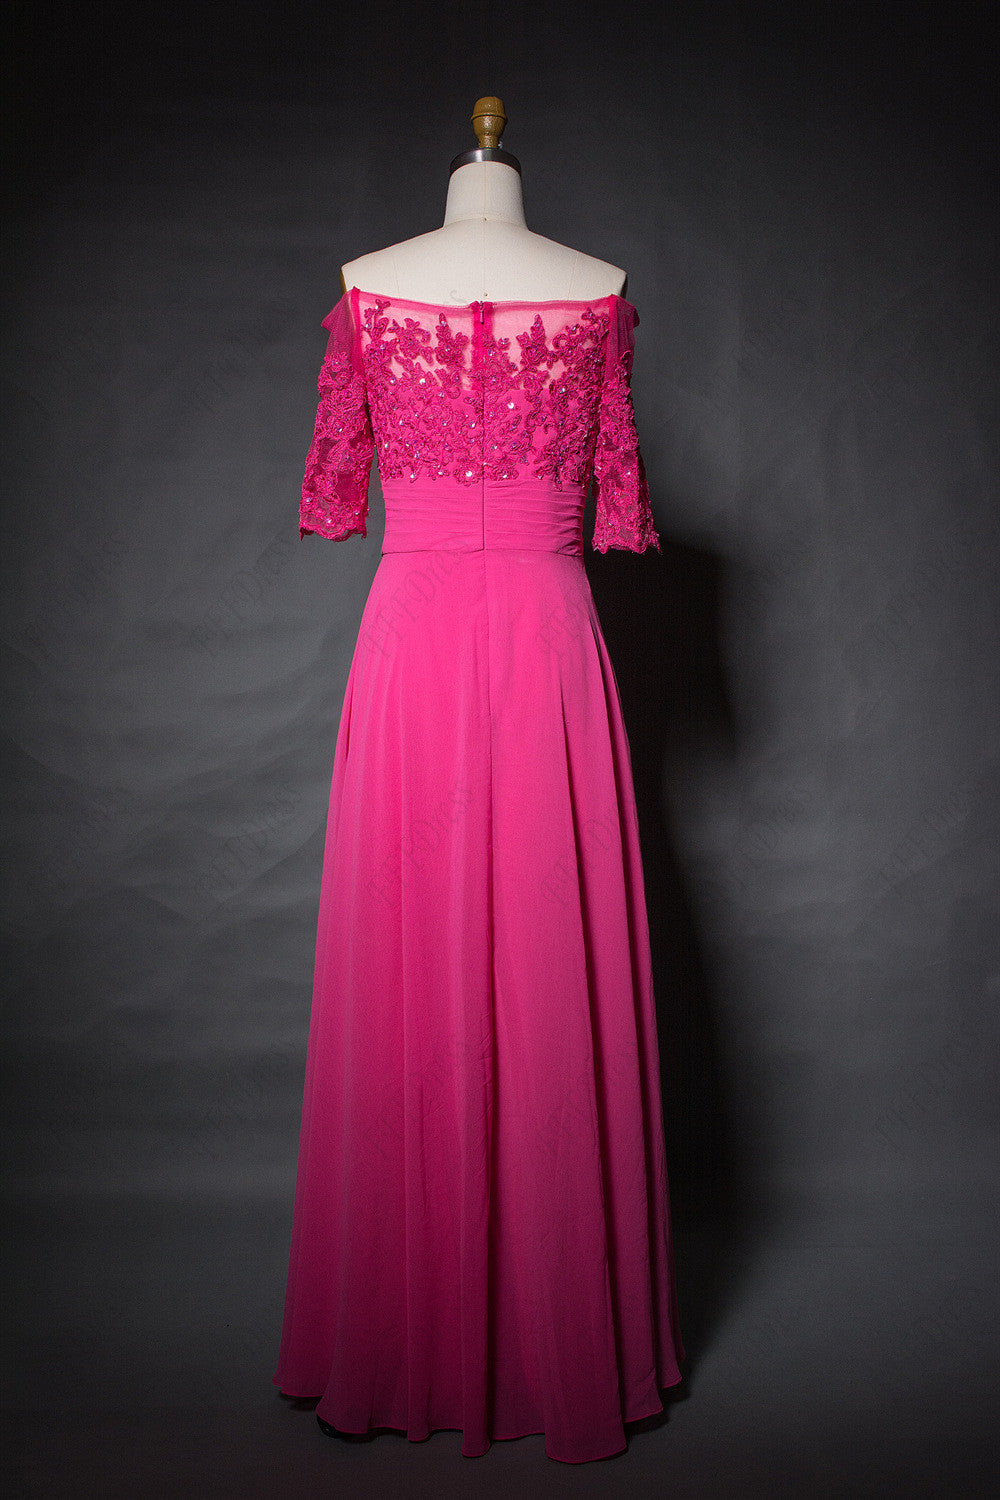 Off the shoulder fuchsia bridesmaid dress with sleeves